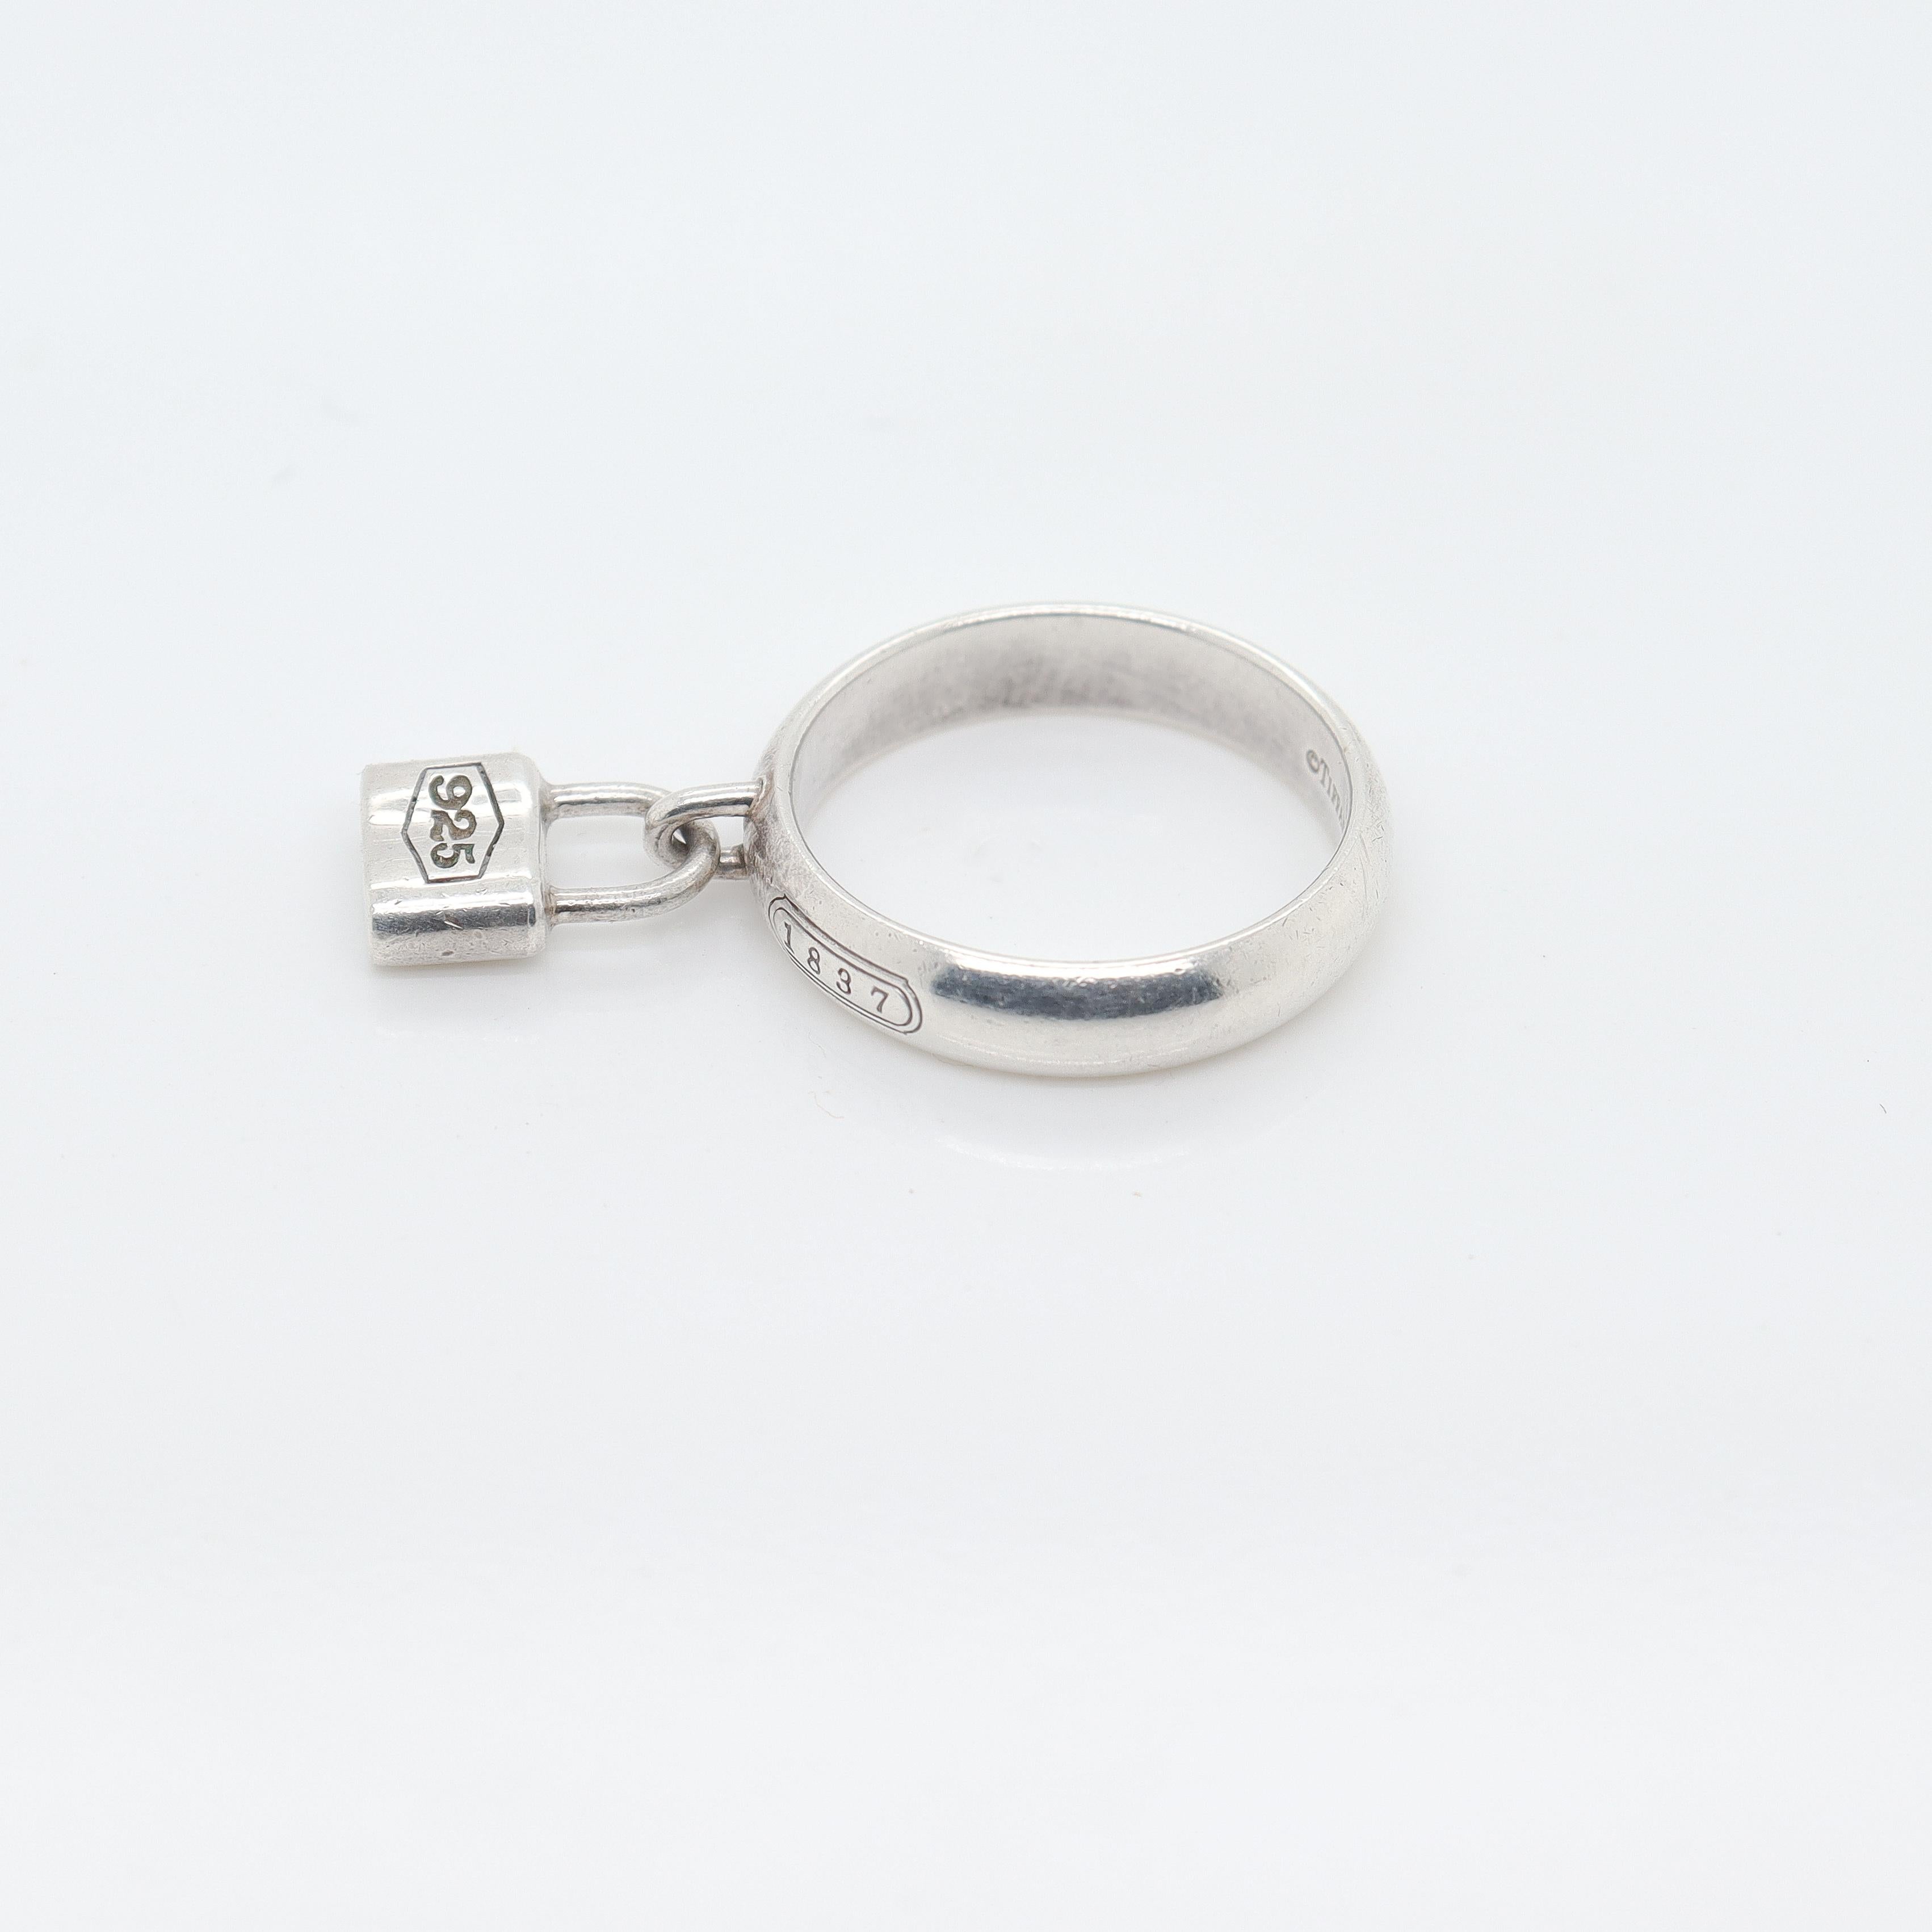 Tiffany & Co Sterling Silver 1837 Lock Charm Band Ring 1